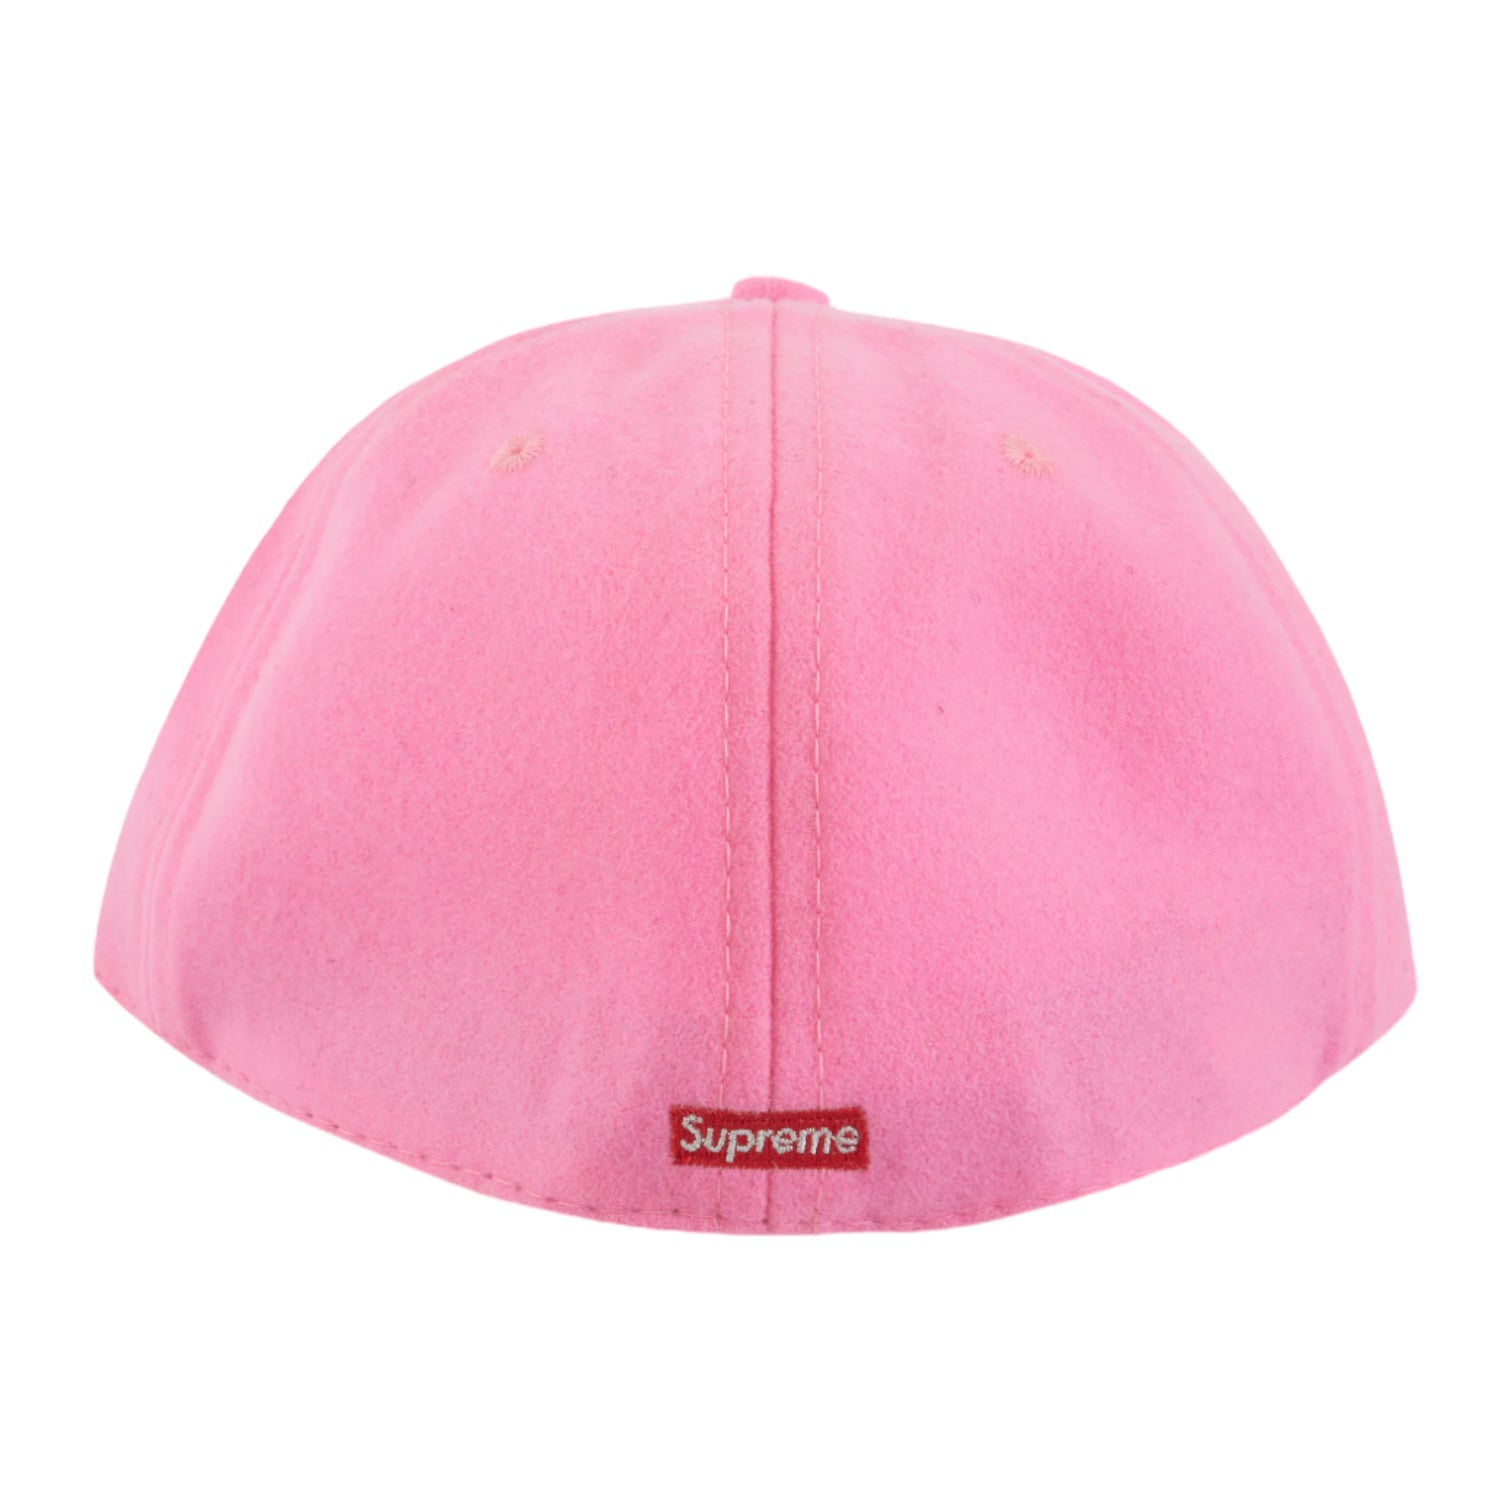 Supreme x Ebbets S Logo Fitted 6-Panel - Bright Pink Baseball Cap